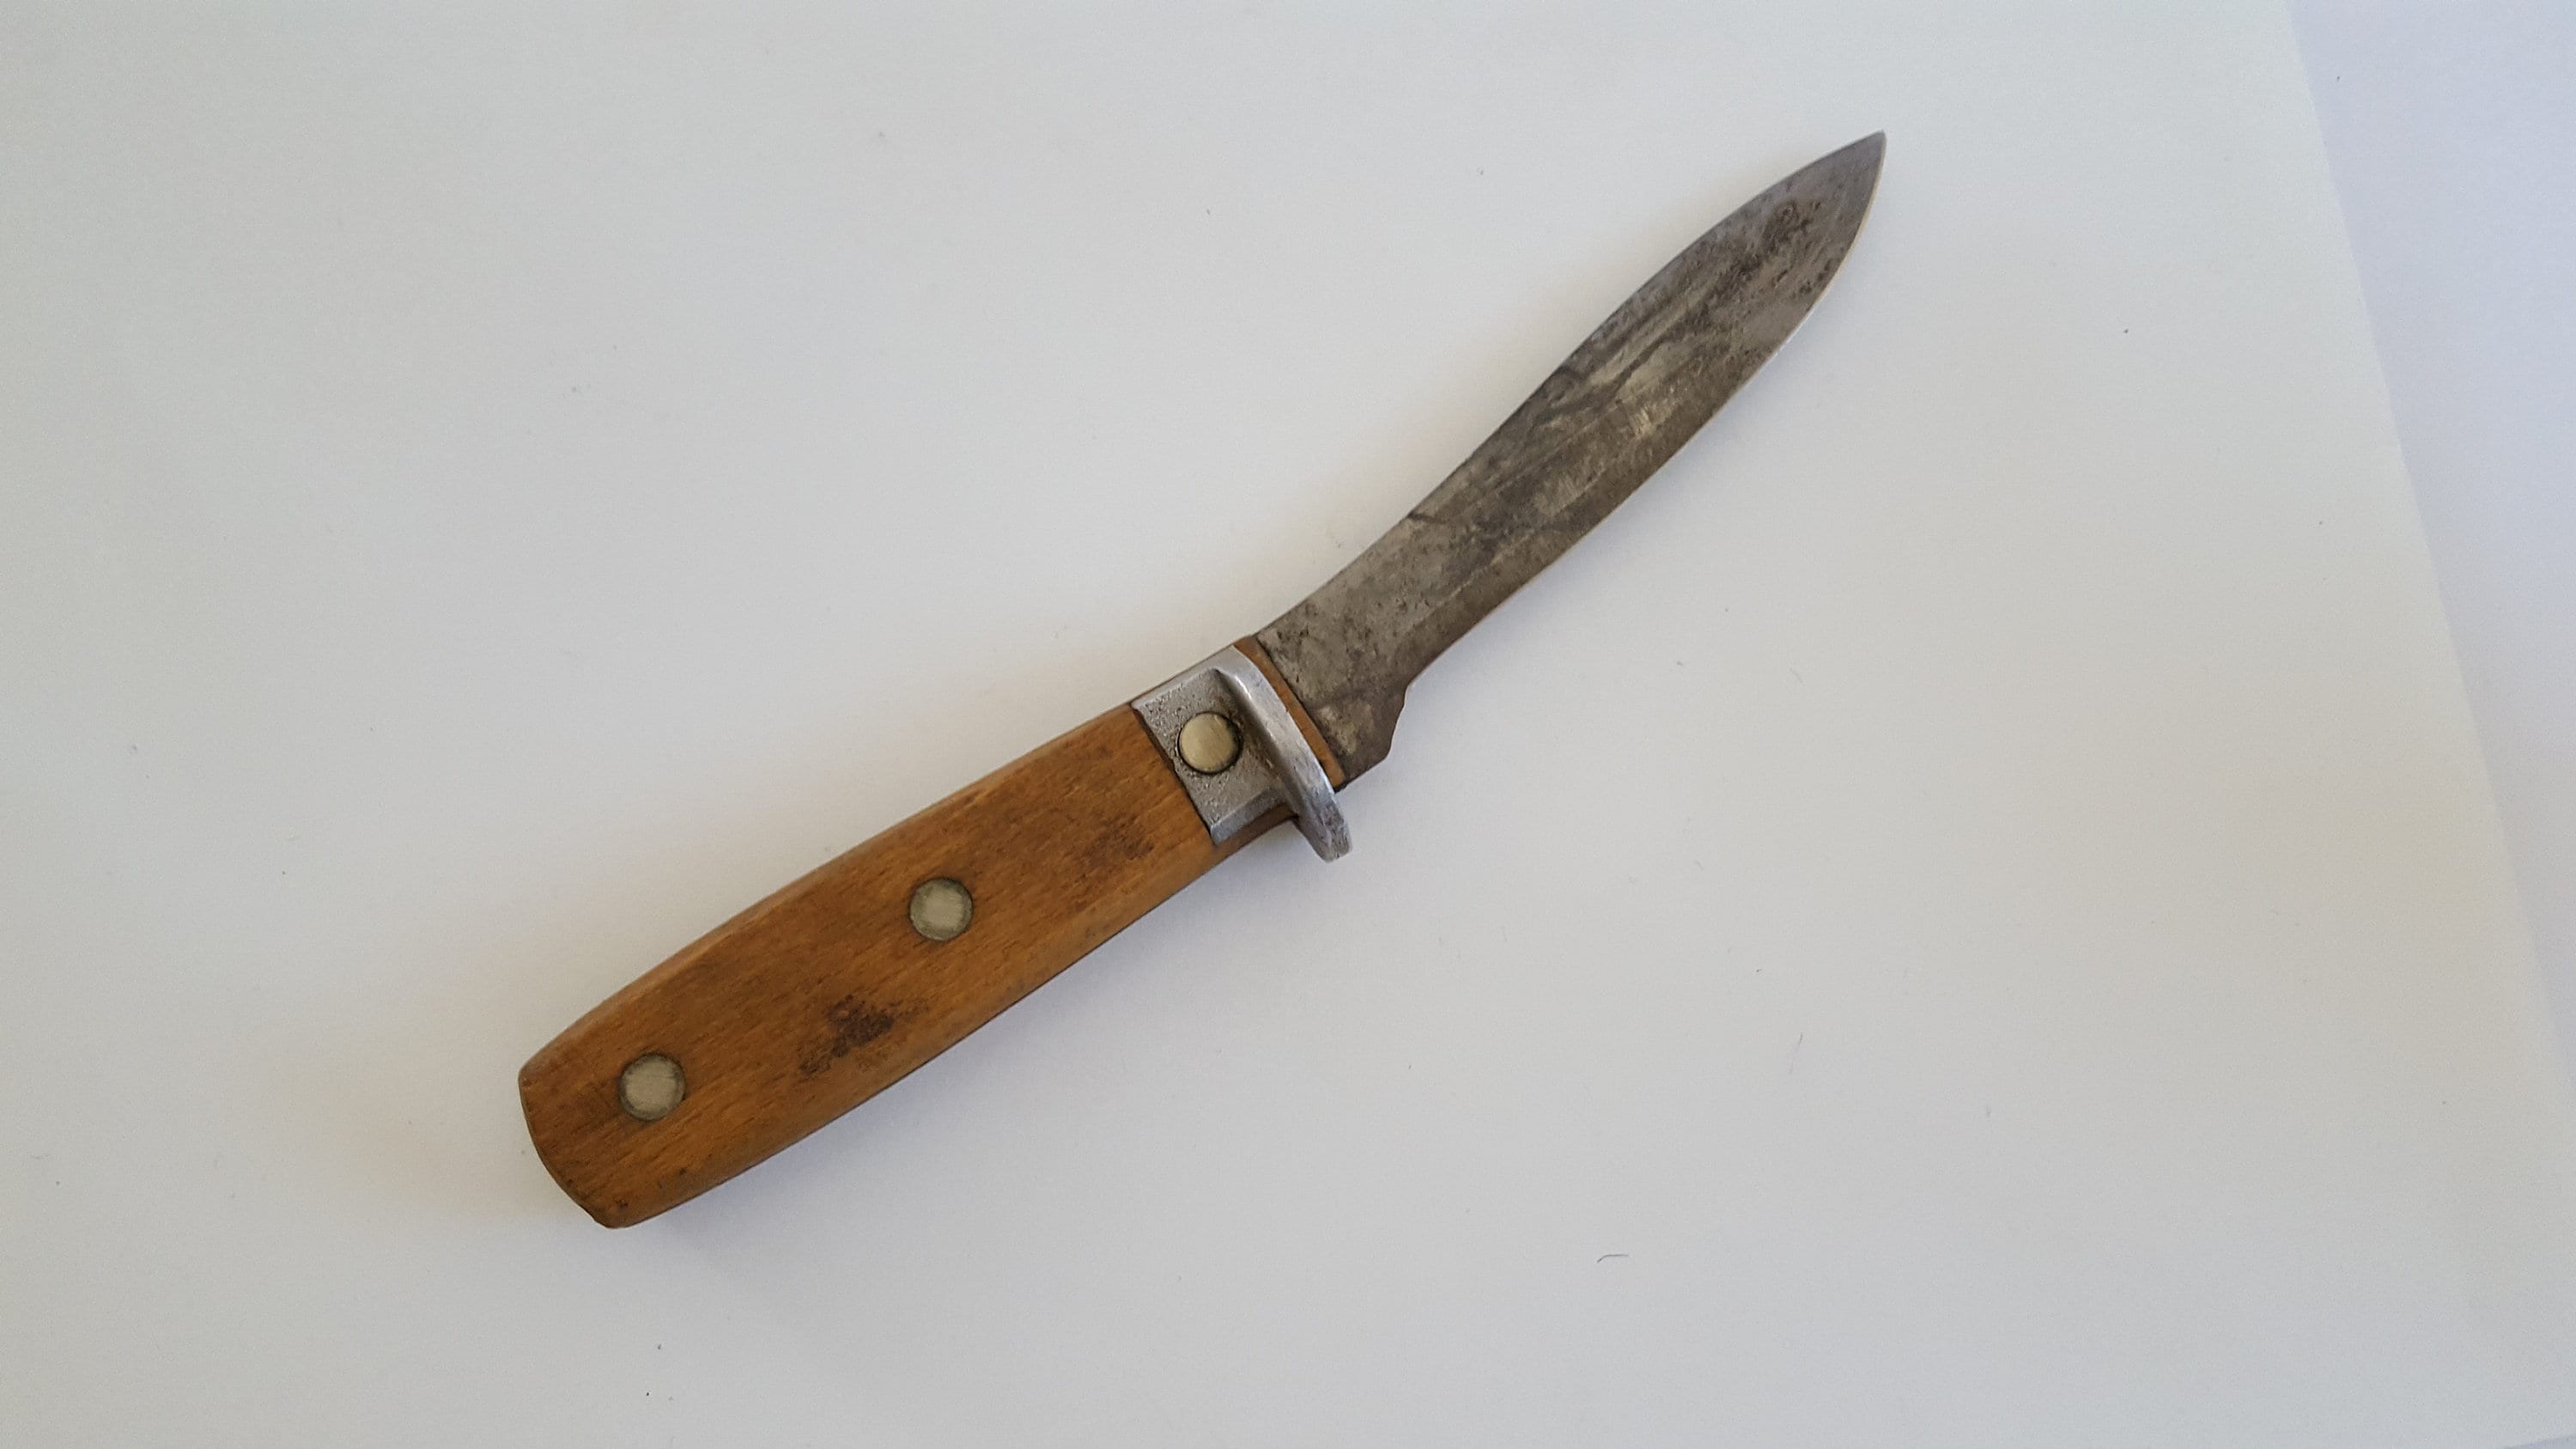 Vintage Circa 1950's Possibly Handmade Butcher Type Knife, Steel